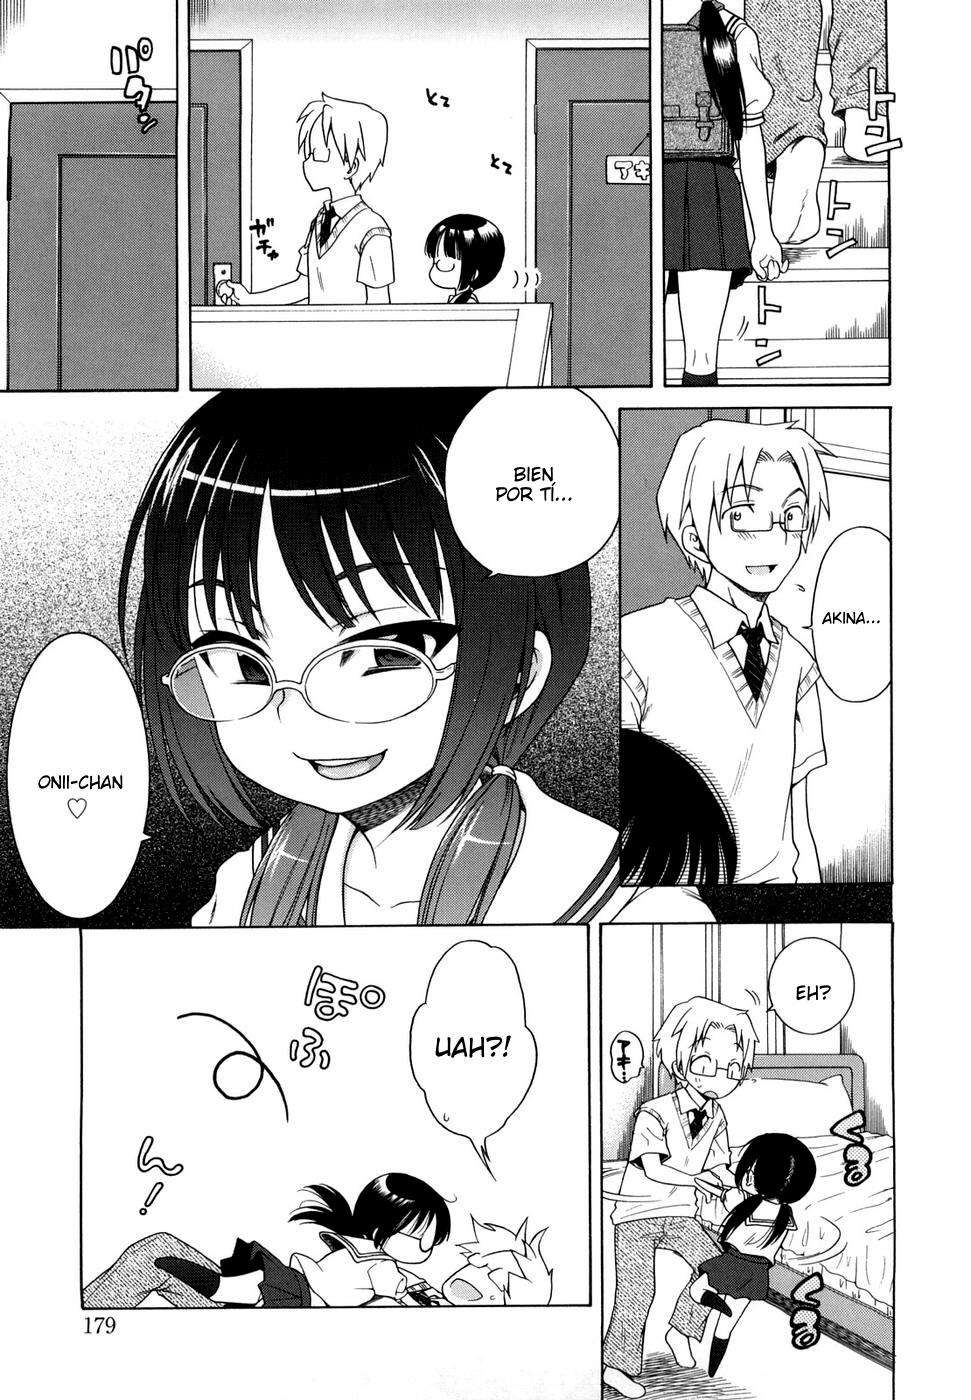 Onii-chan!! Me gustas.. Chapter-10 - 2